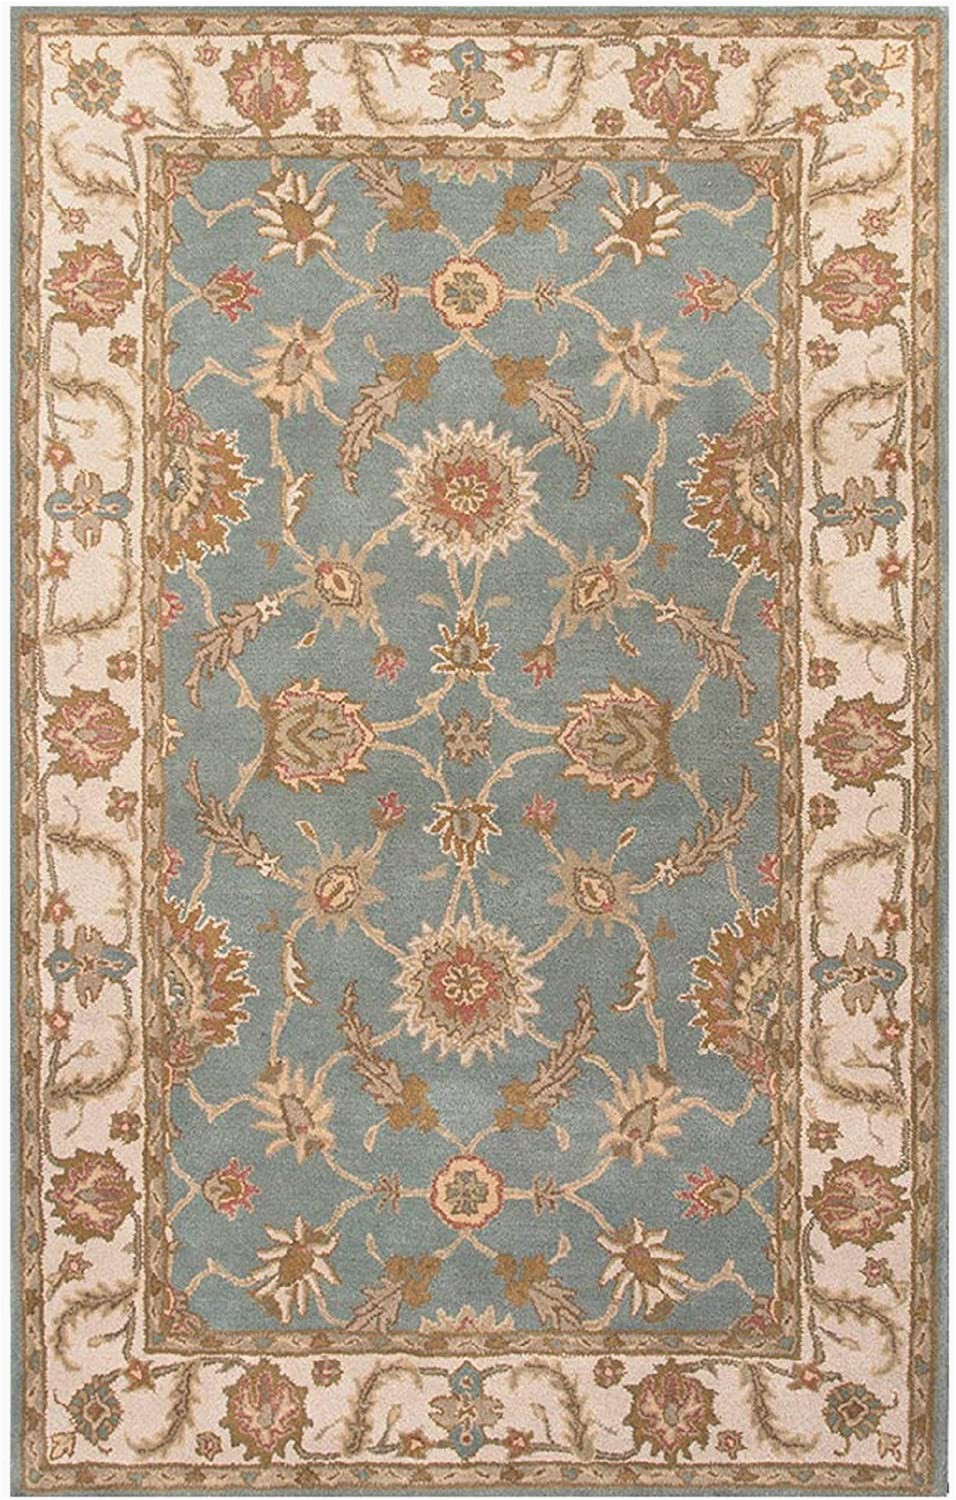 Diva at Home area Rugs Diva at Home 8 X 10 Artemis Brown Green White and Red